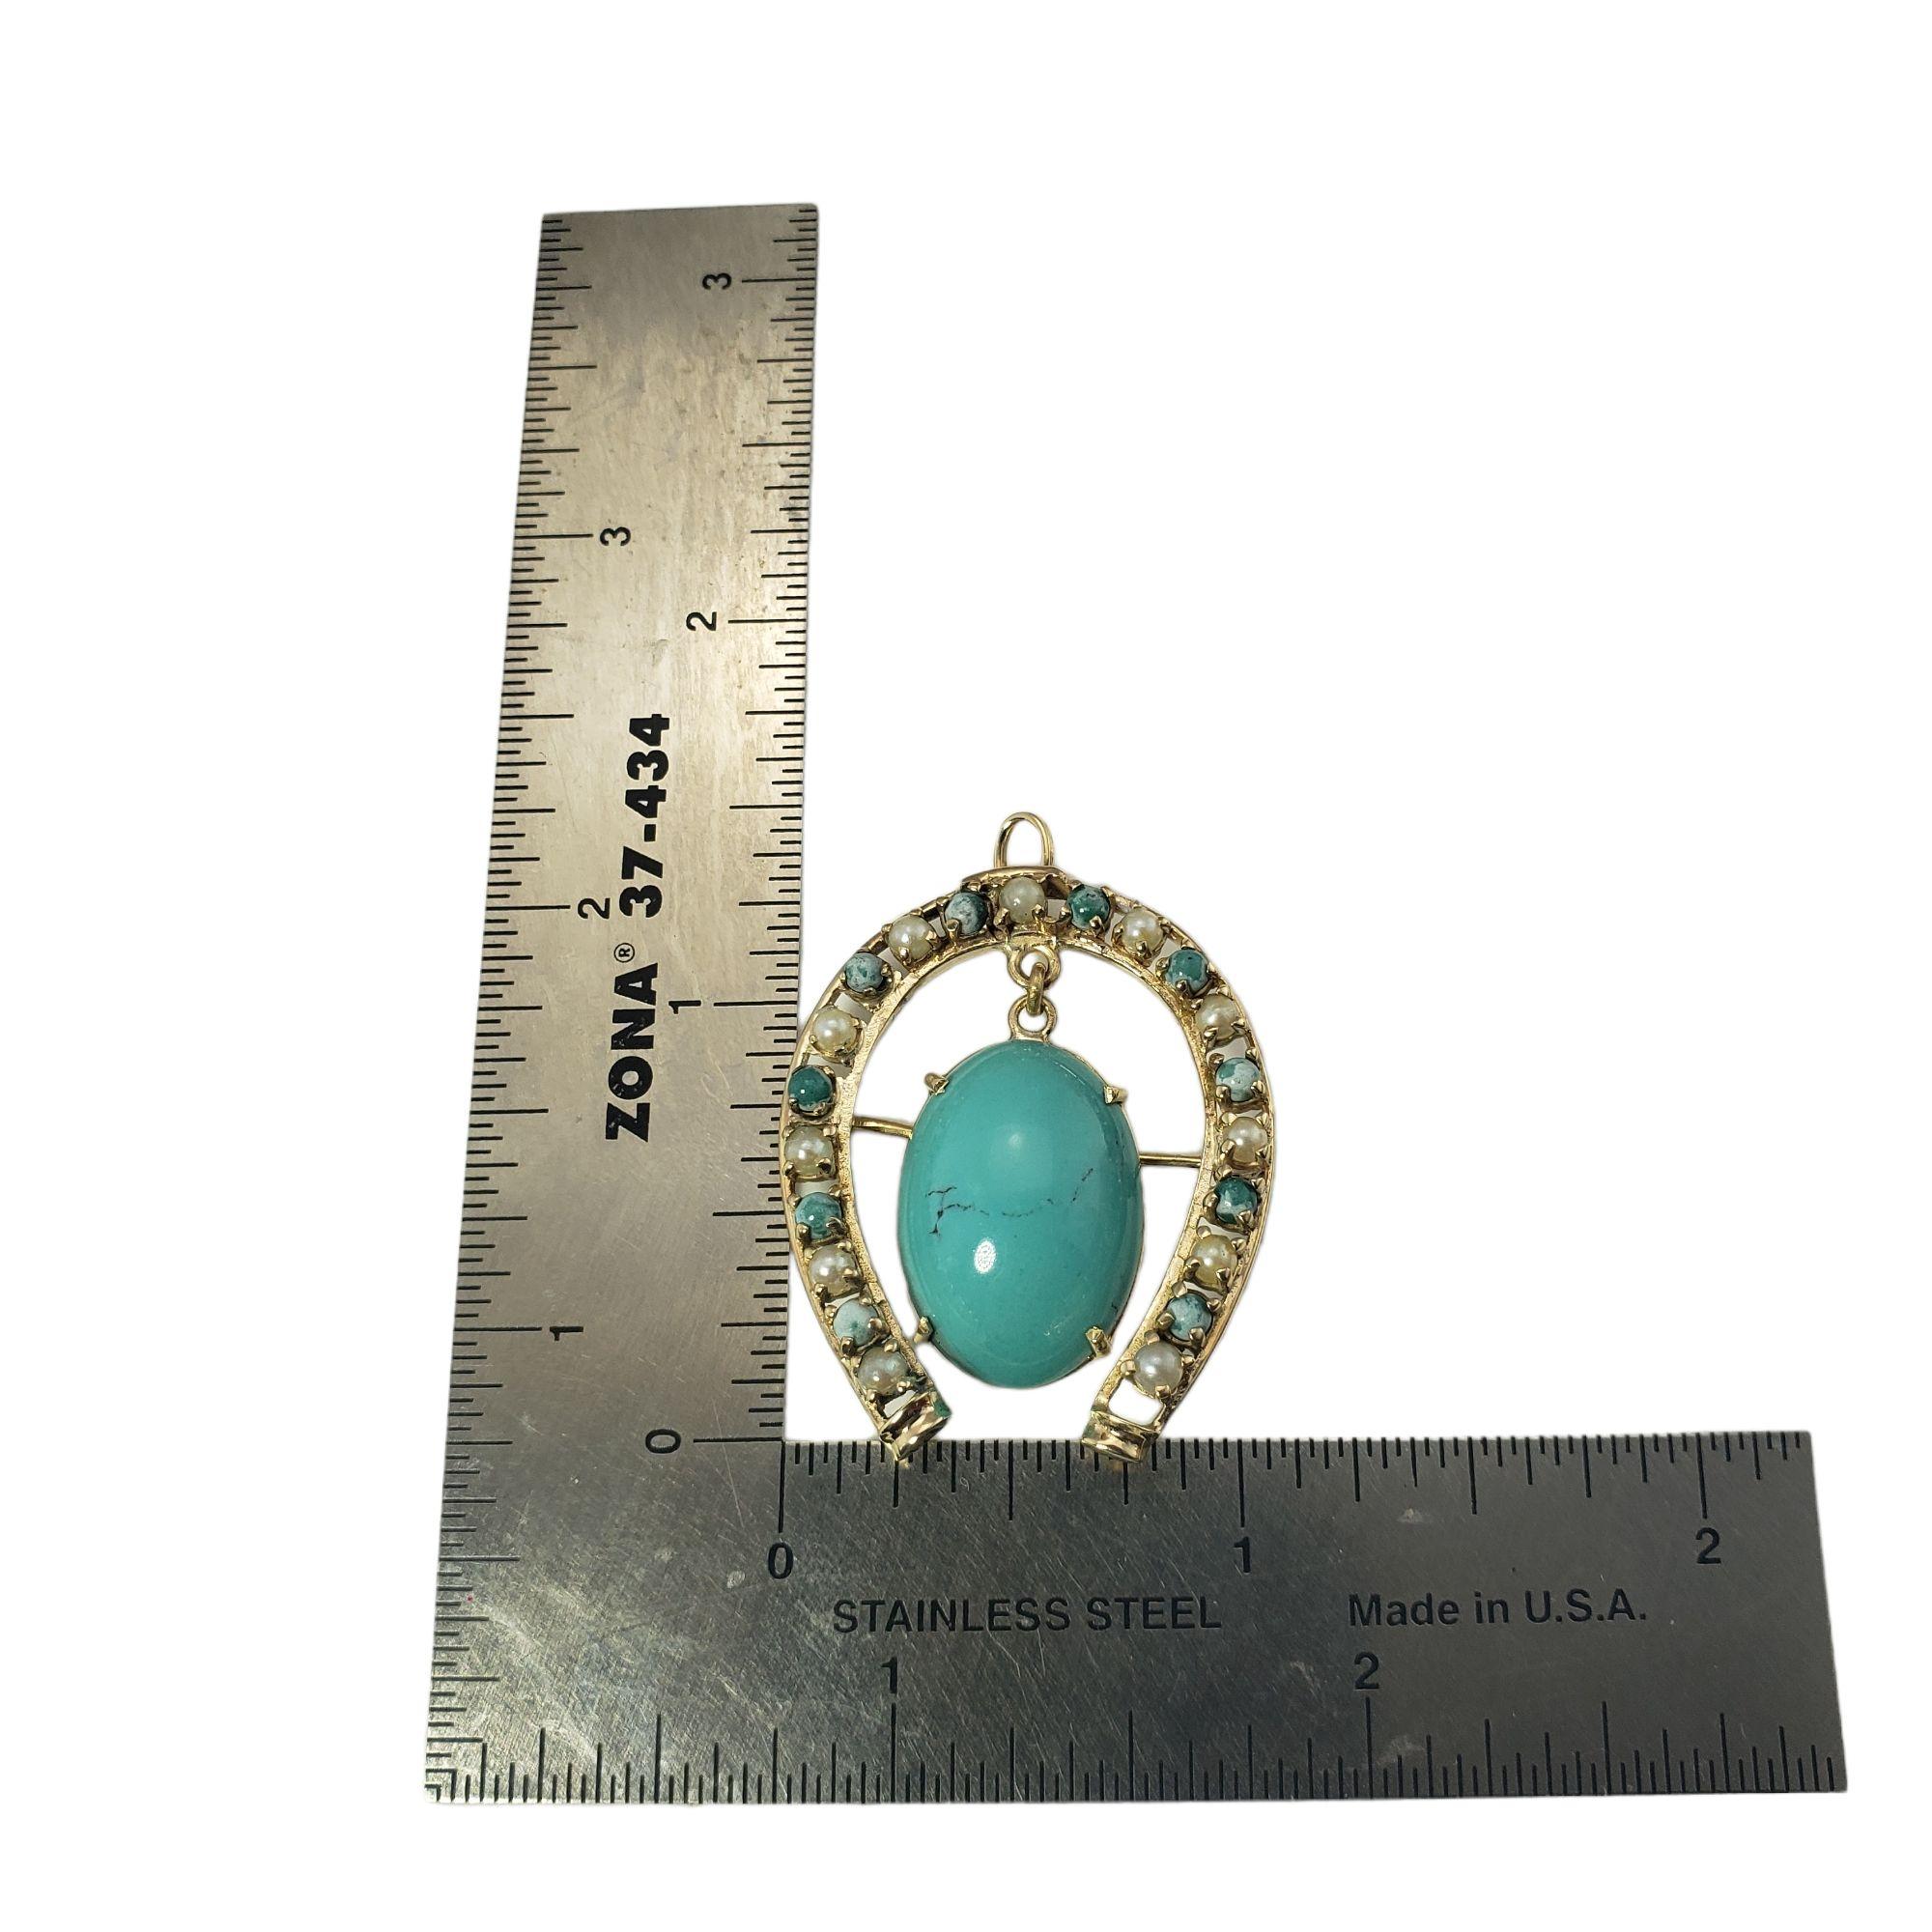 Vintage 14 Karat Yellow Gold Turquoise and Pearl Horseshoe Brooch/Pin-

This elegant brooch features one oval turquoise stone (20 mm x 15 mm), 11 round turquoise stones and 11 round pearls set in classic 14K yellow gold. Can be worn as a pin or a